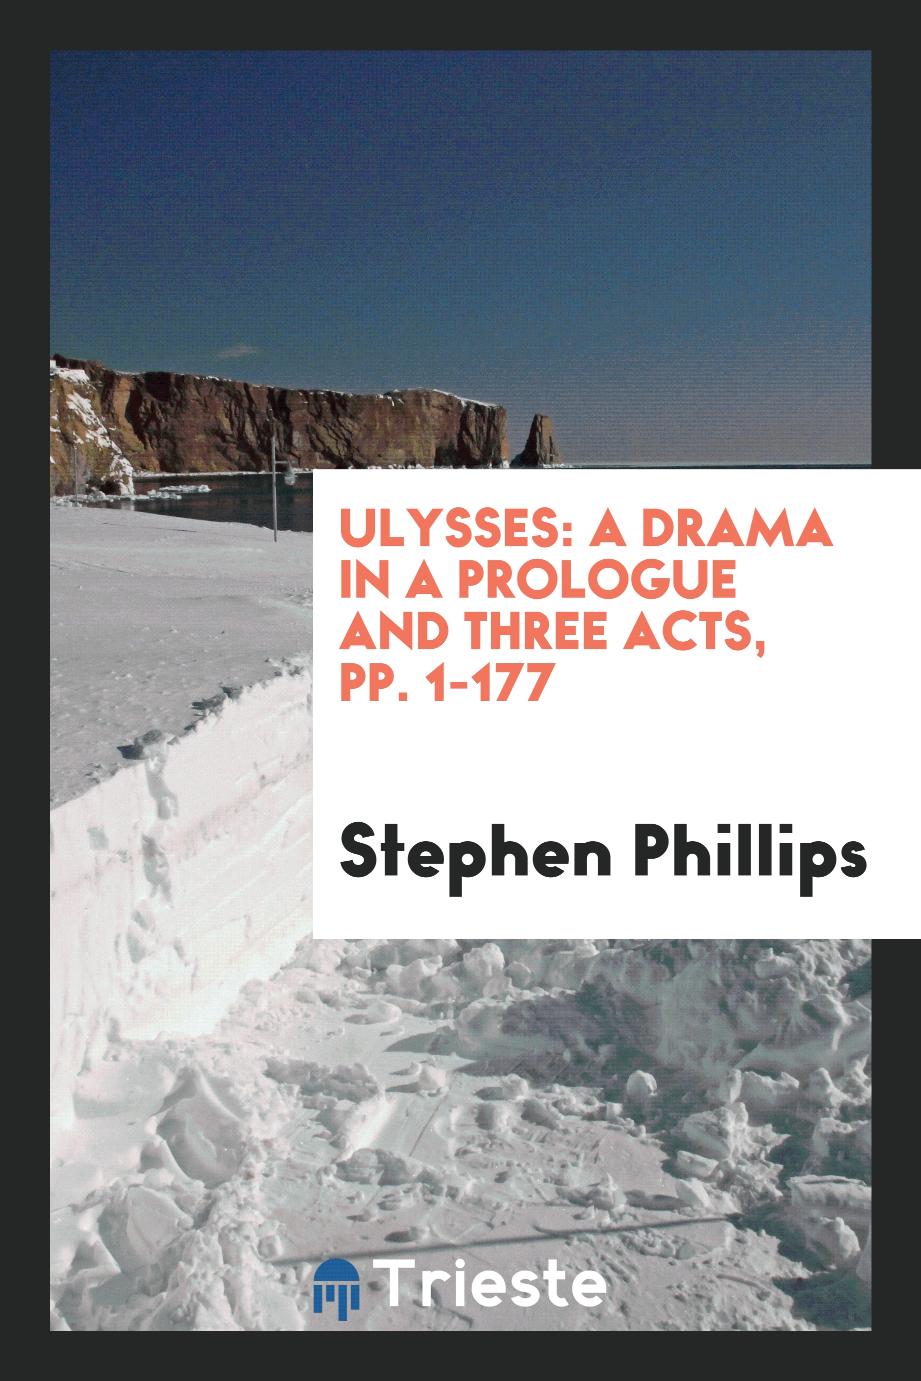 Ulysses: A Drama in a Prologue and Three Acts, pp. 1-177